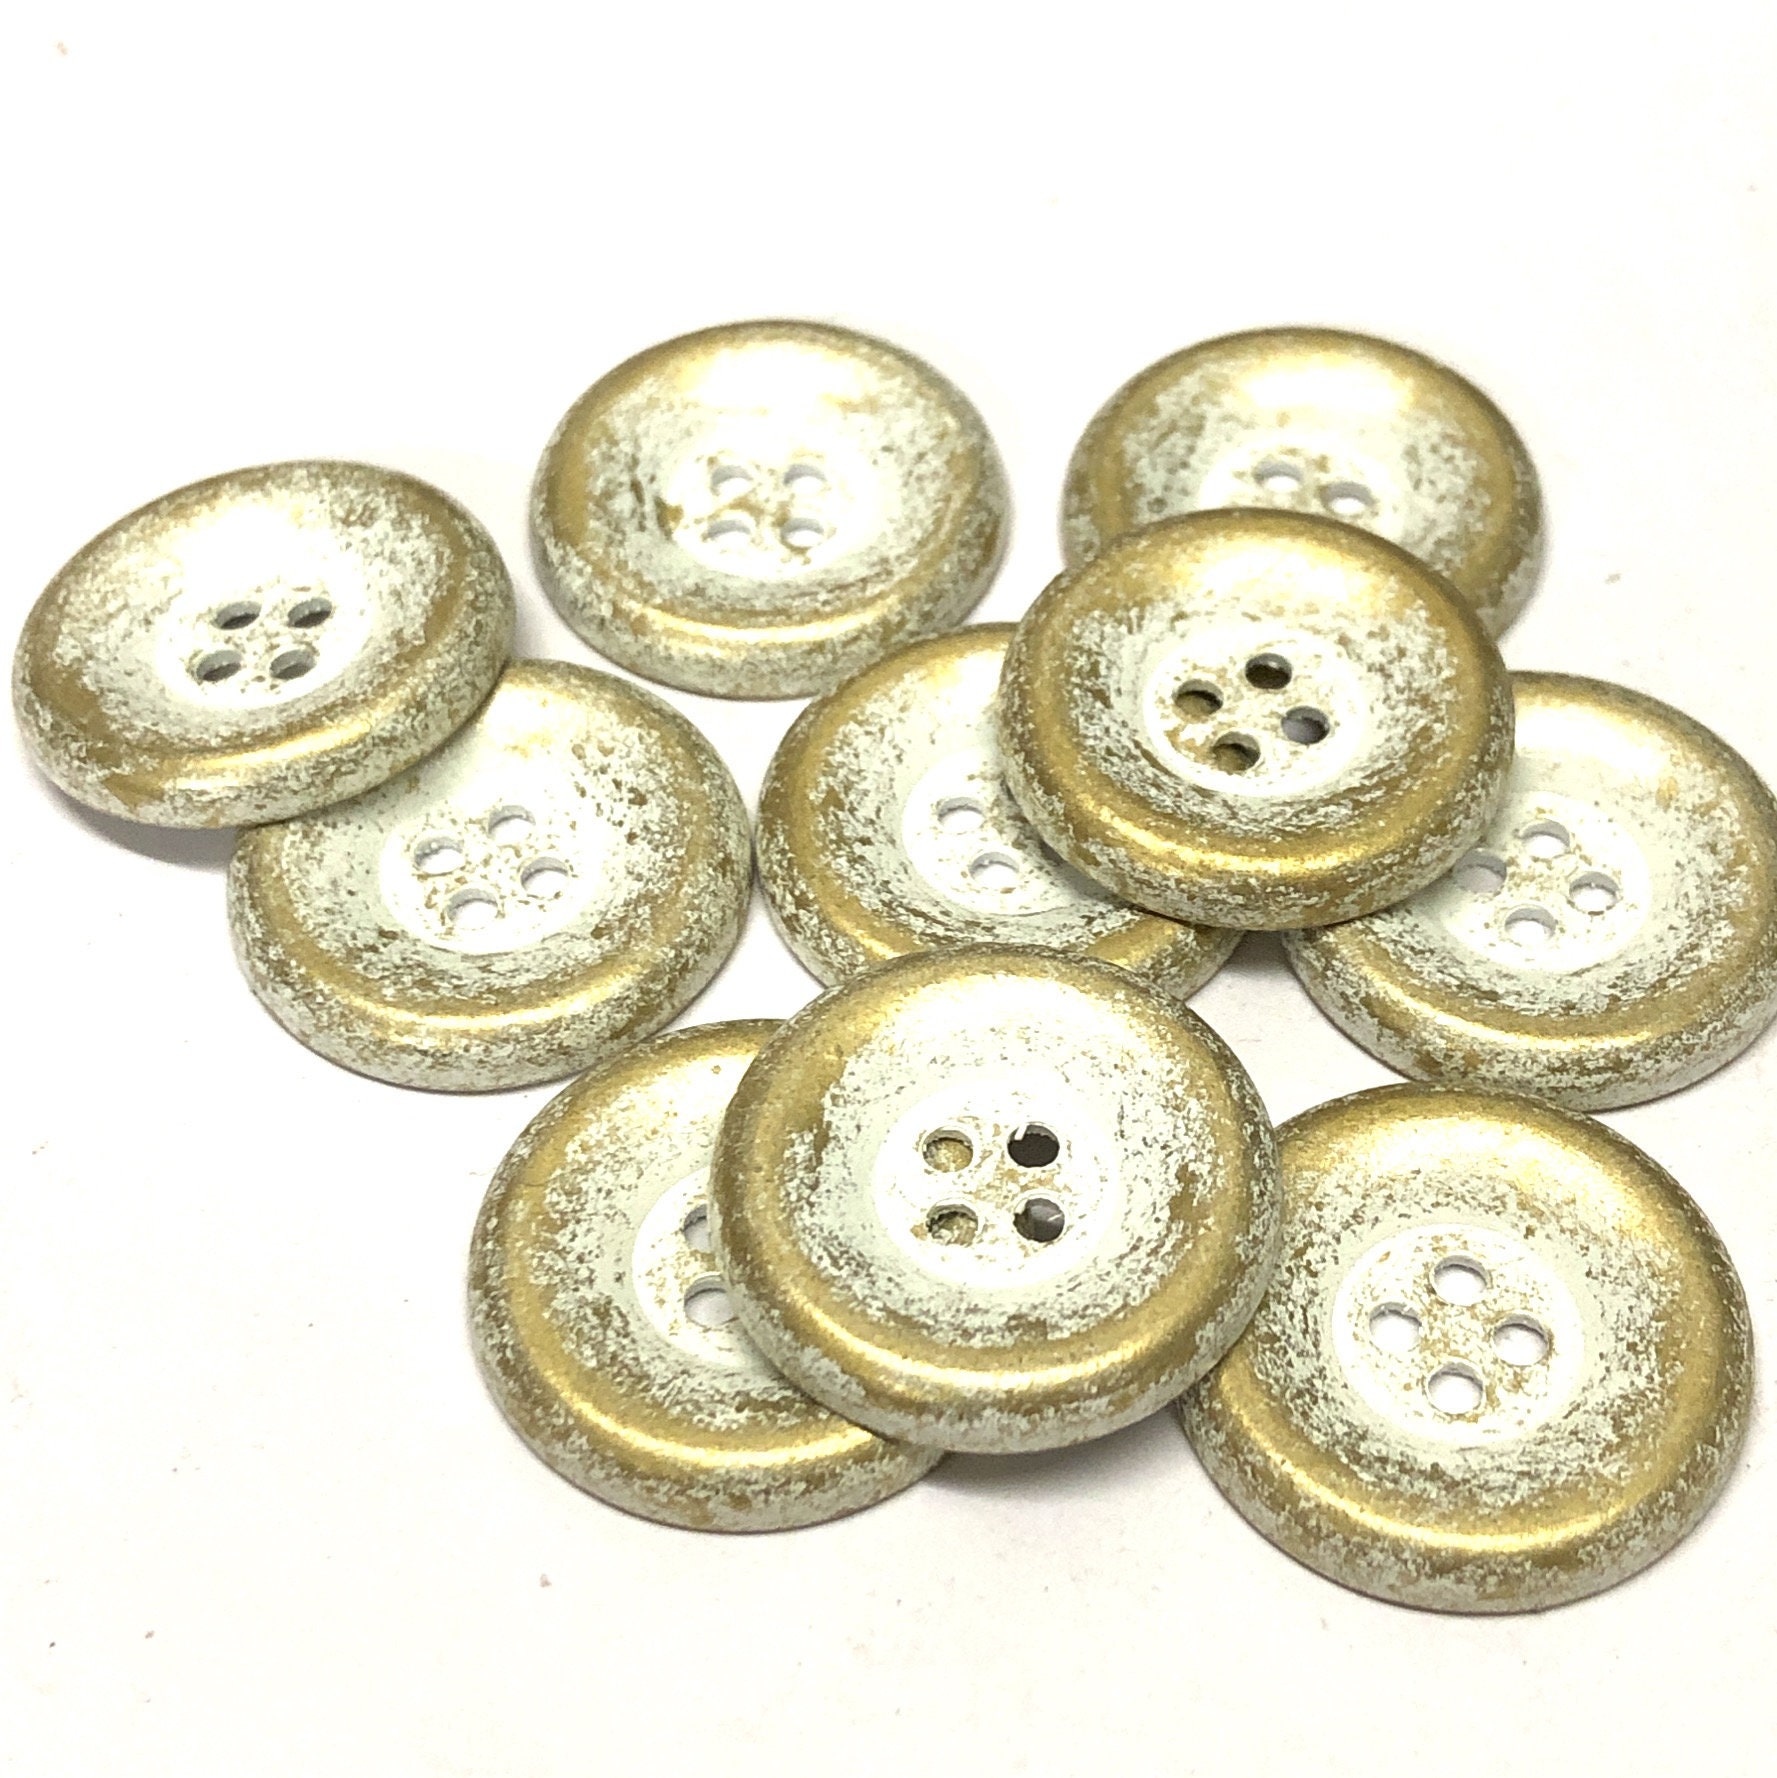 10, 25mm Light Wood Buttons With Handmade With Love Wording, Wooden Buttons  for Crafts, 40L Wood Buttons 